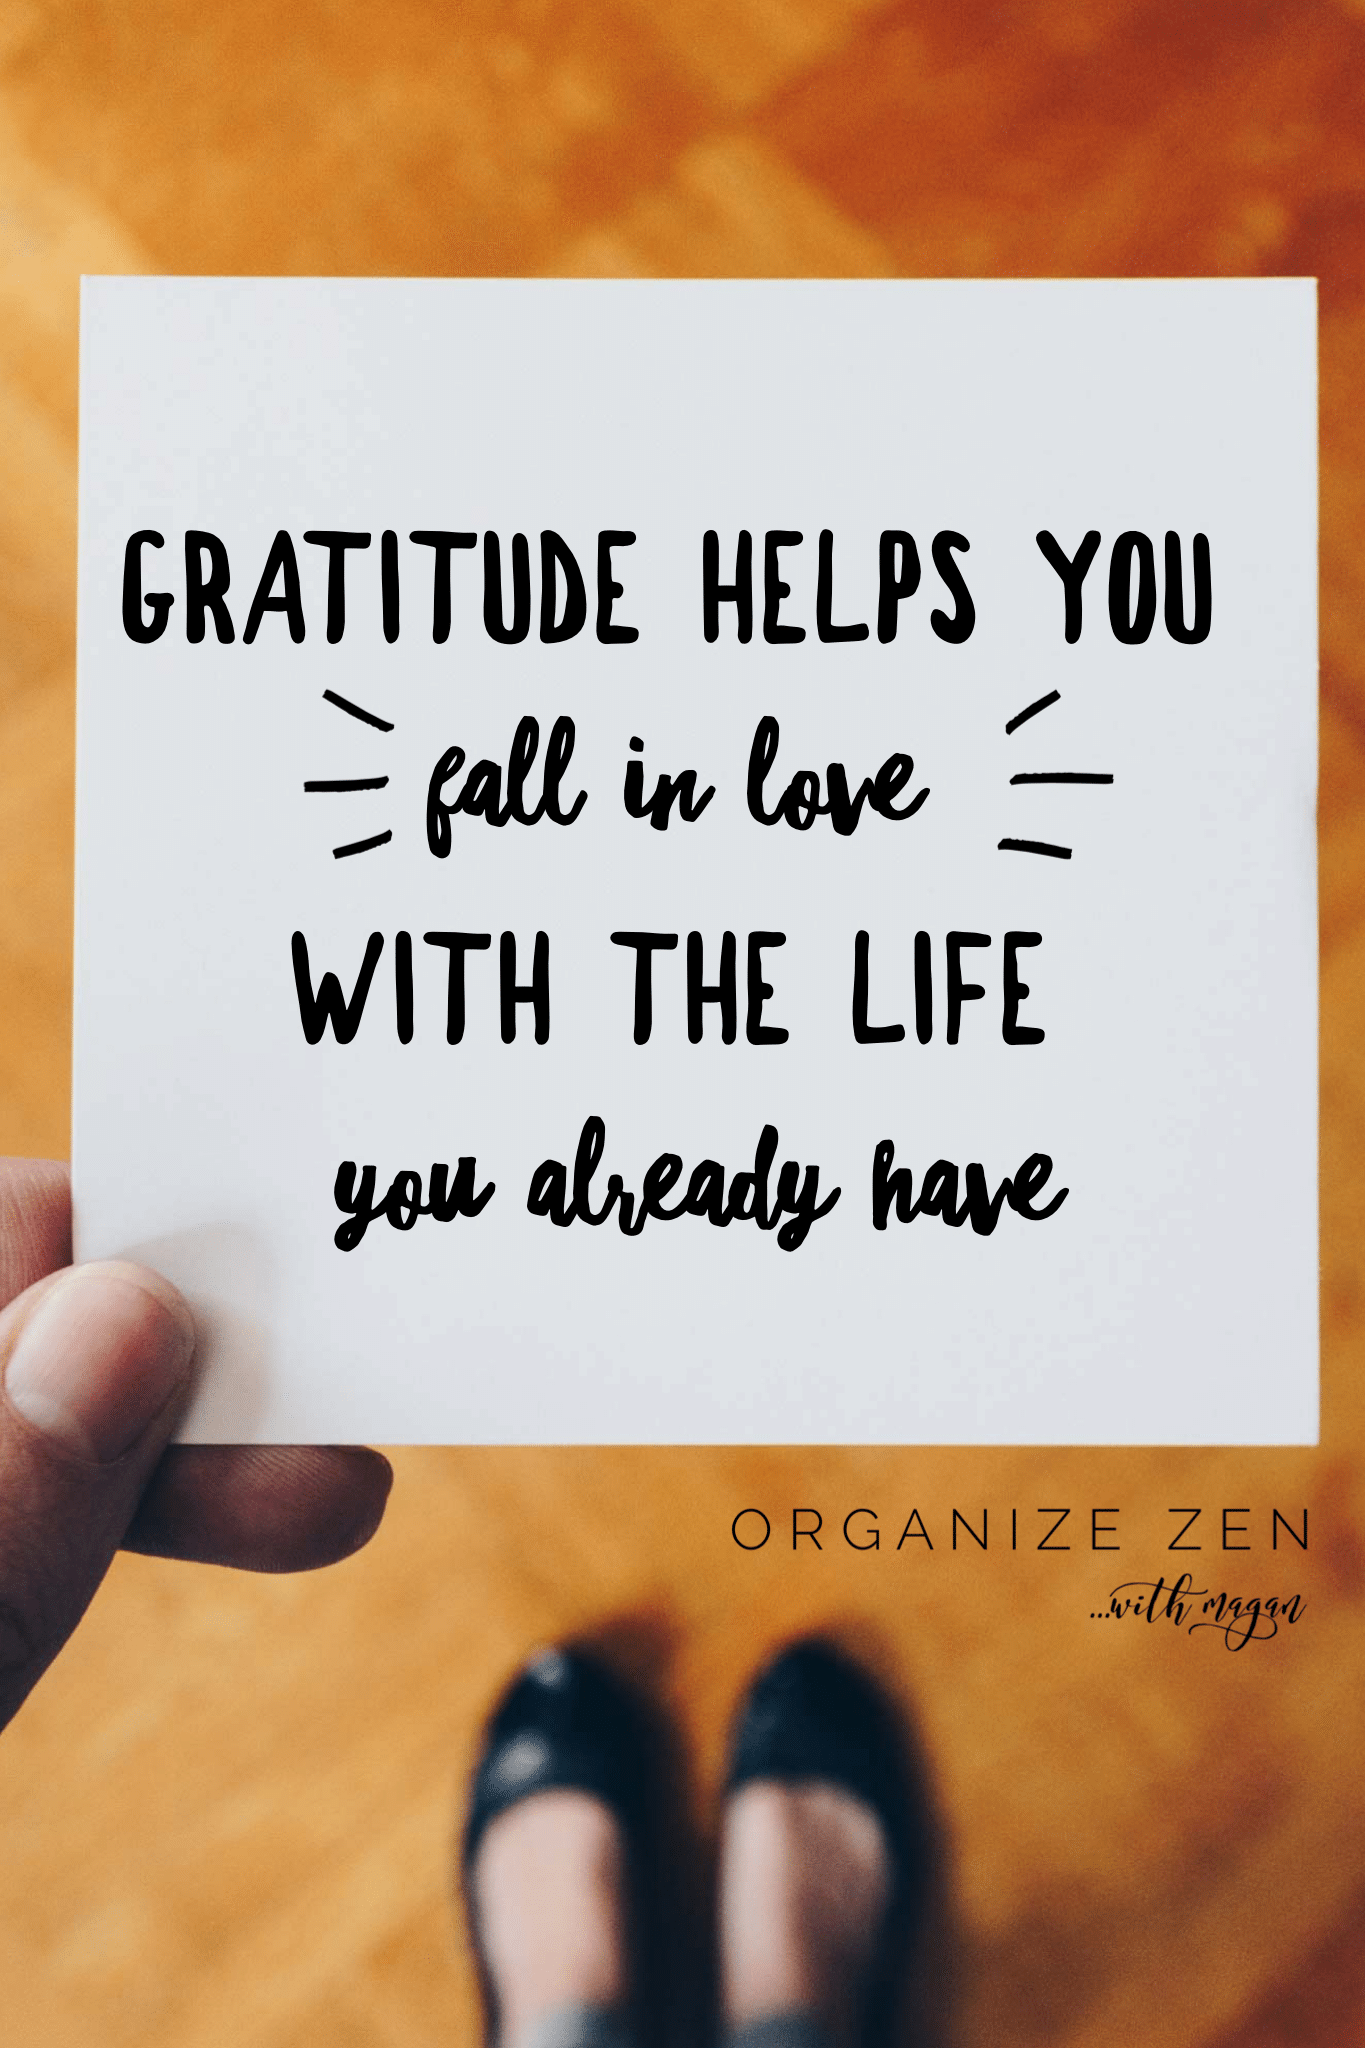 Gratitude Helps you fall in love with the life you already have quote